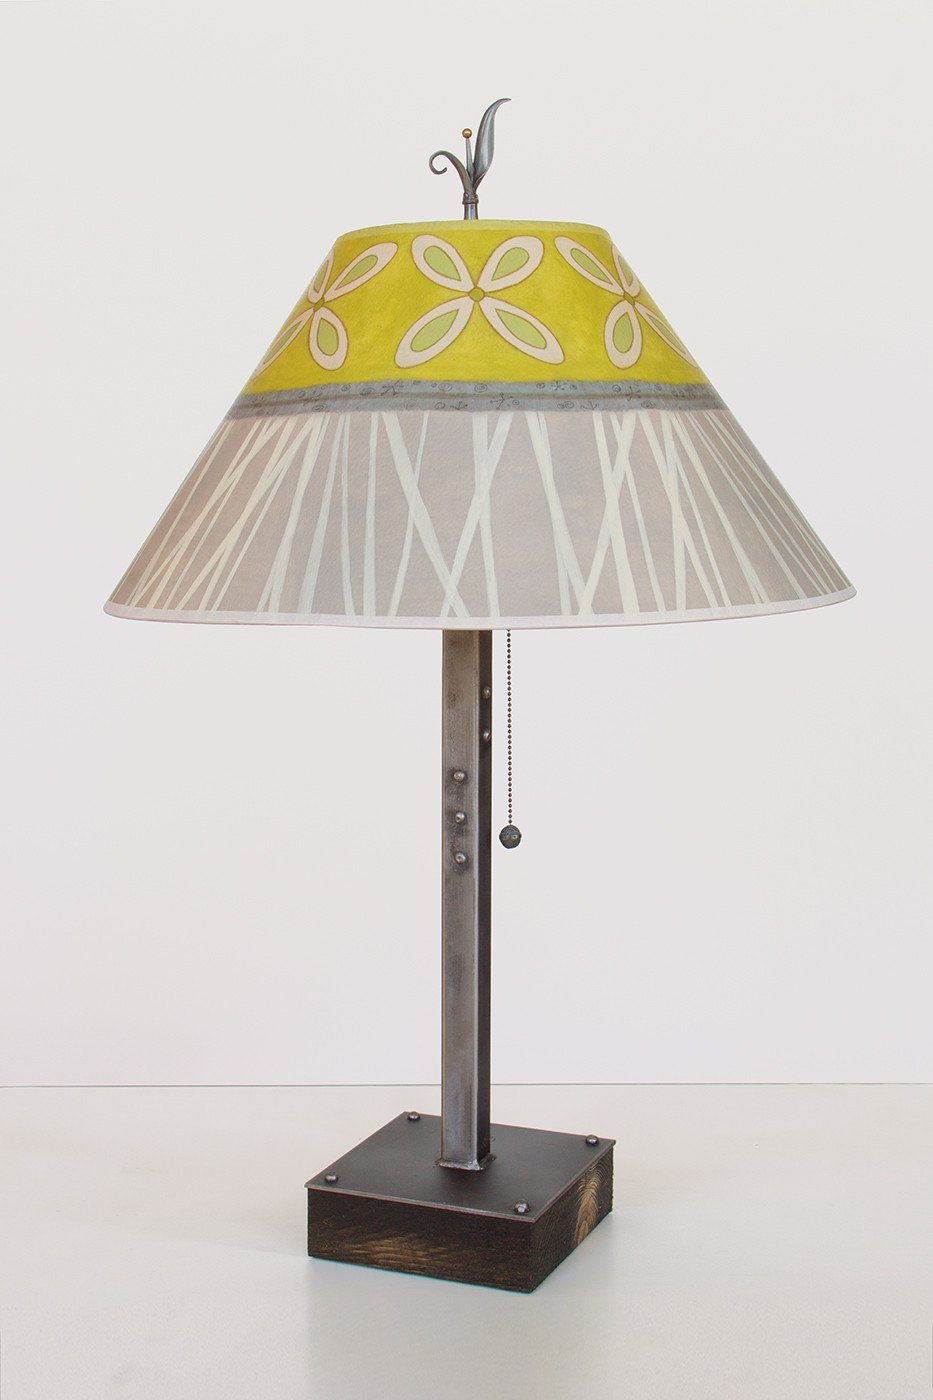 Steel Table Lamp on Wood with Large Conical Shade in Kiwi